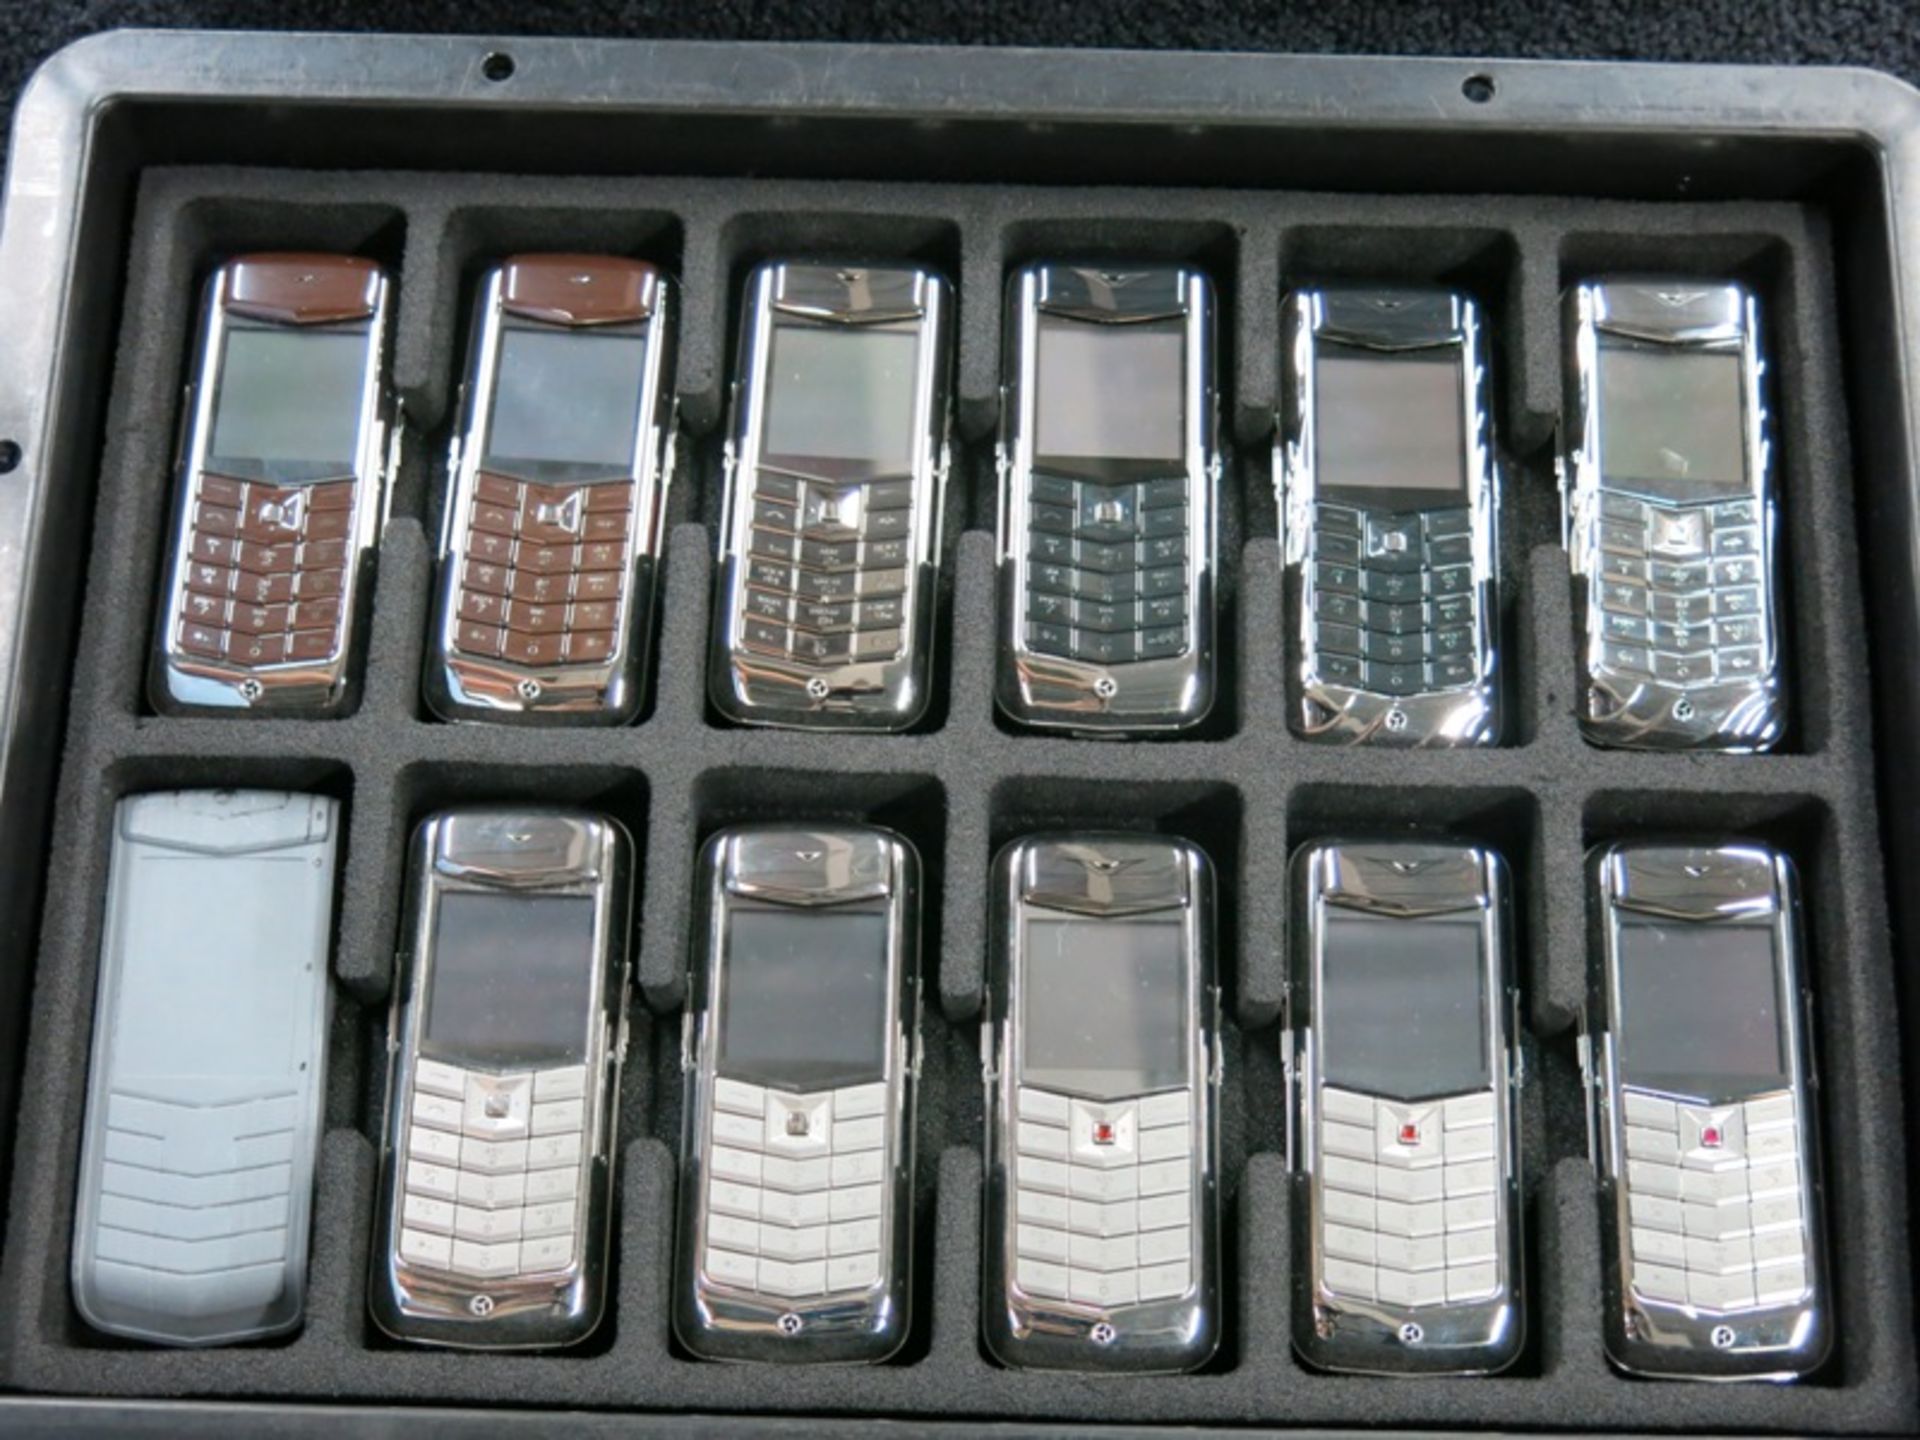 Archive Collection of 49 Vertu Constellation Classic Phones - Image 3 of 5